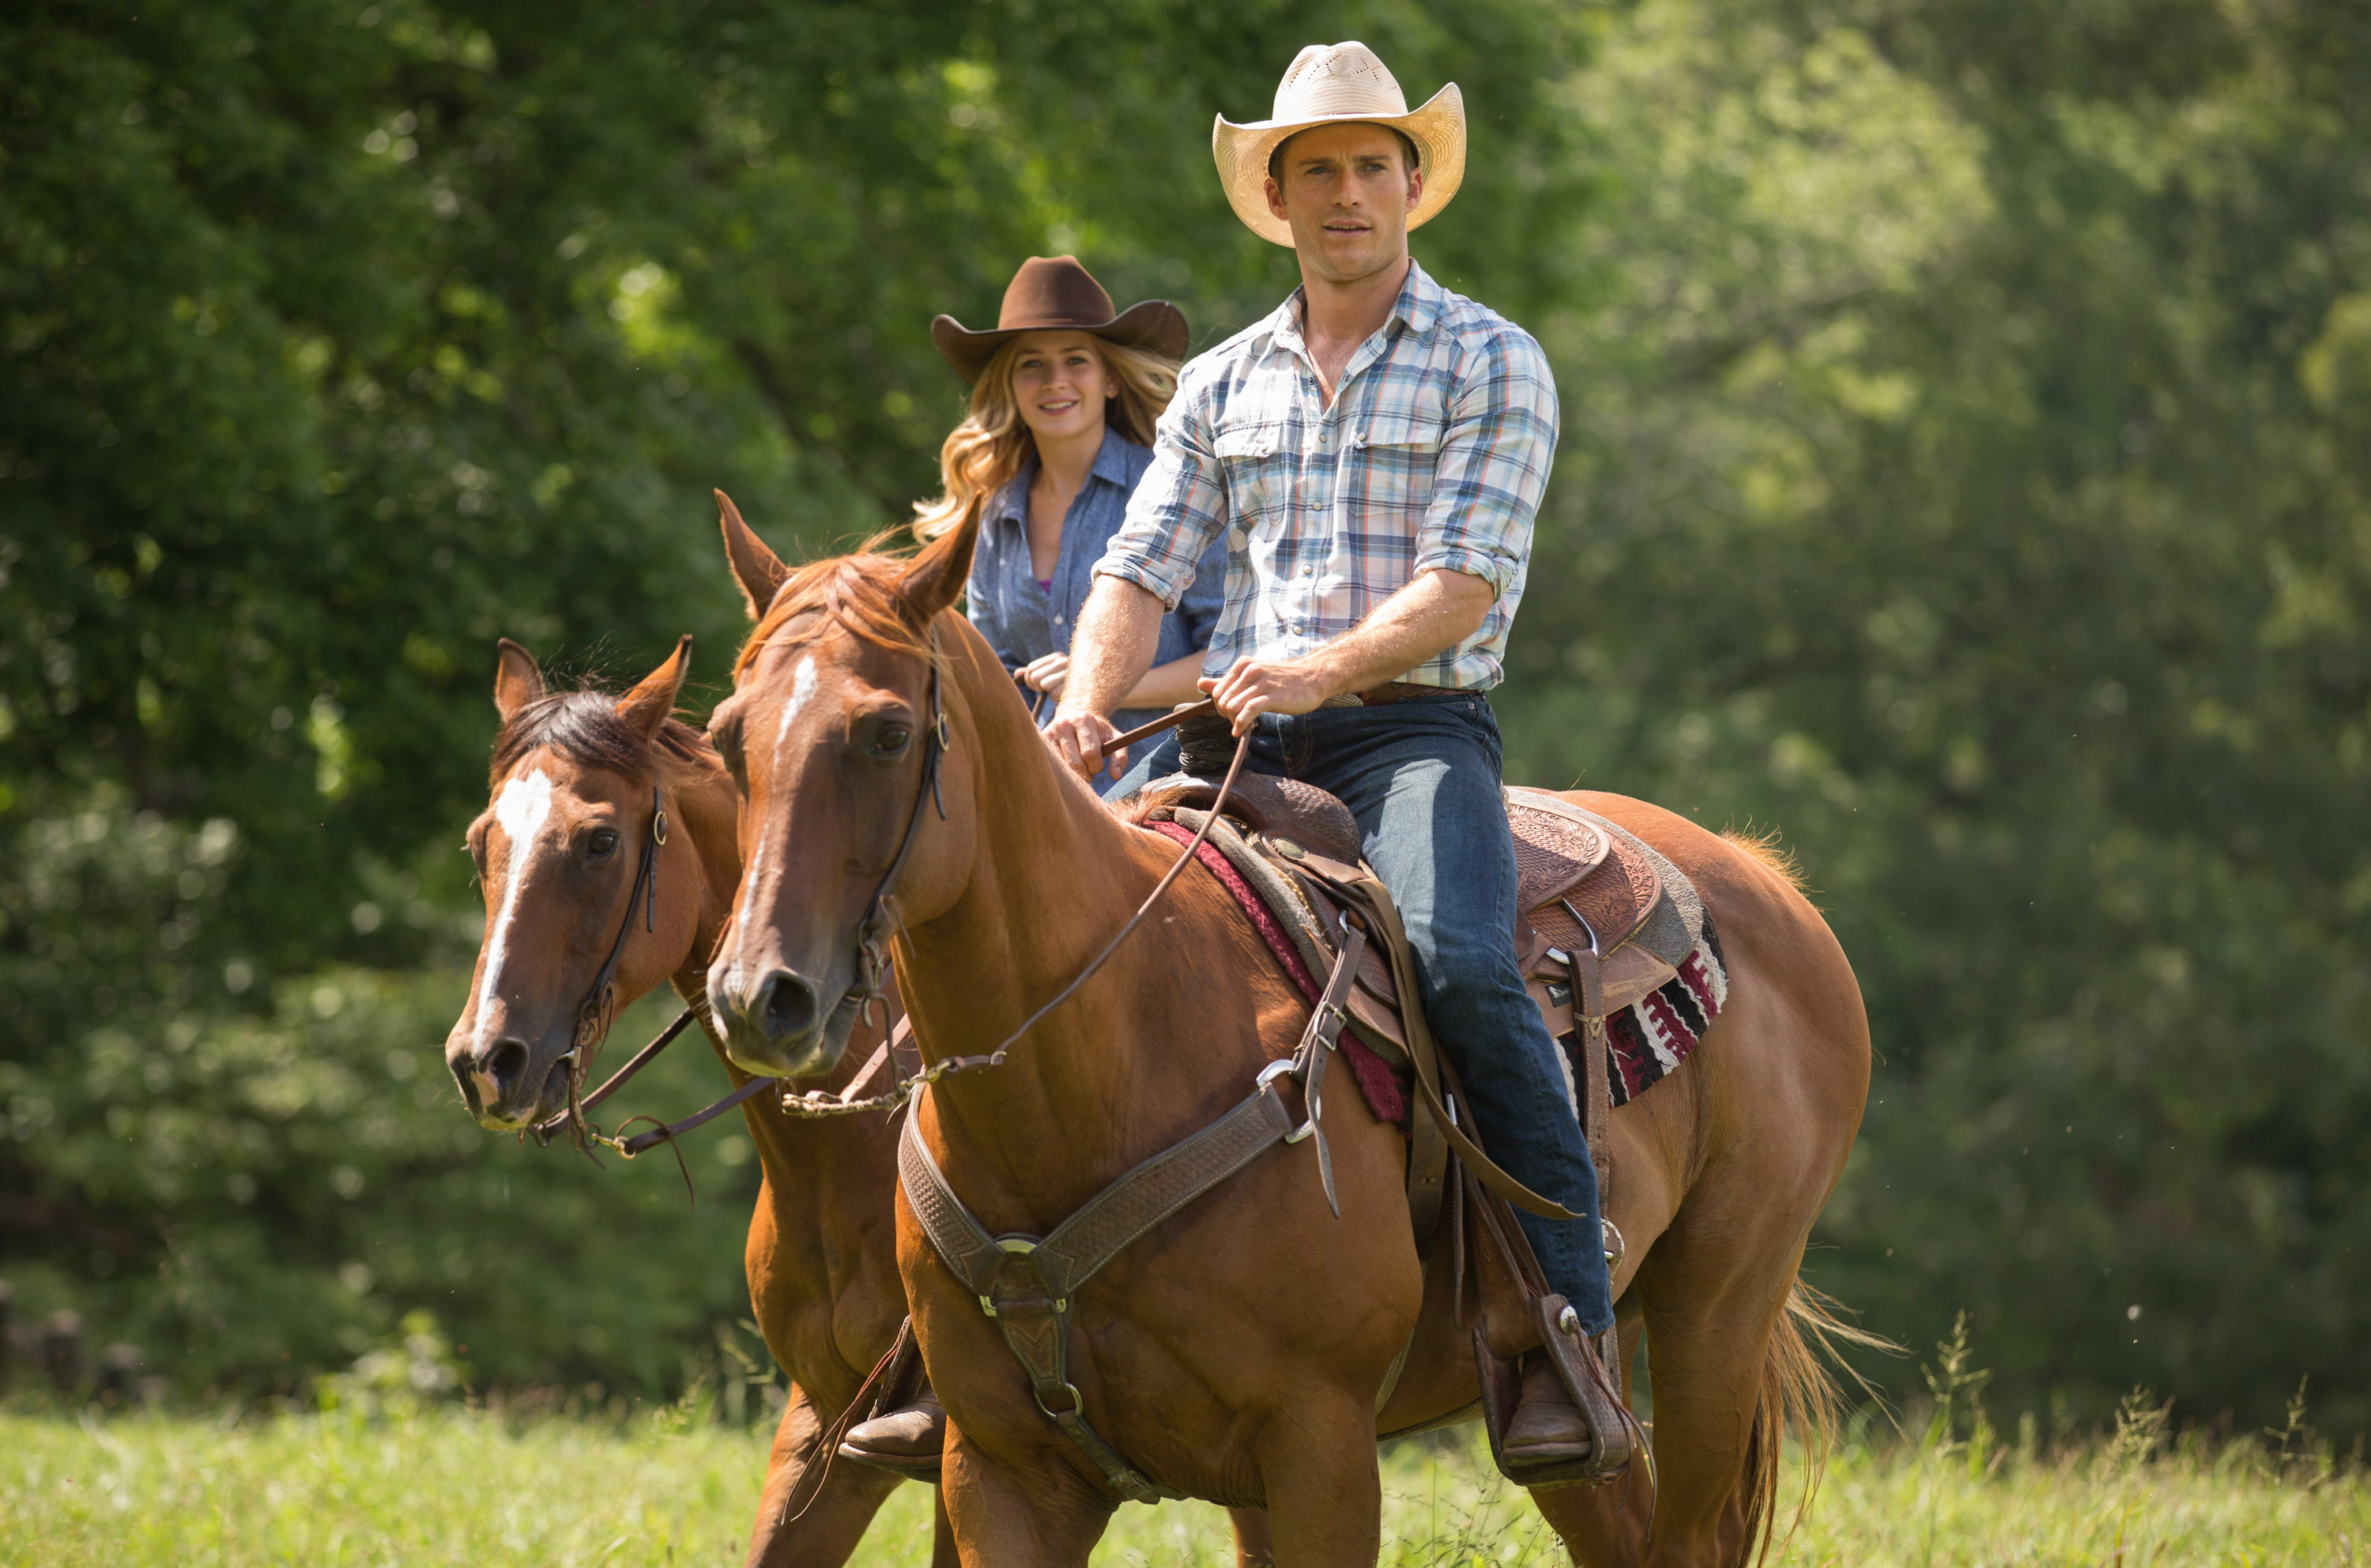 http://aggiecentral.com/wp-content/uploads/2015/04/ENTER_MOVIE-REVIEW-LONGESTRIDE_2_MCT.jpg